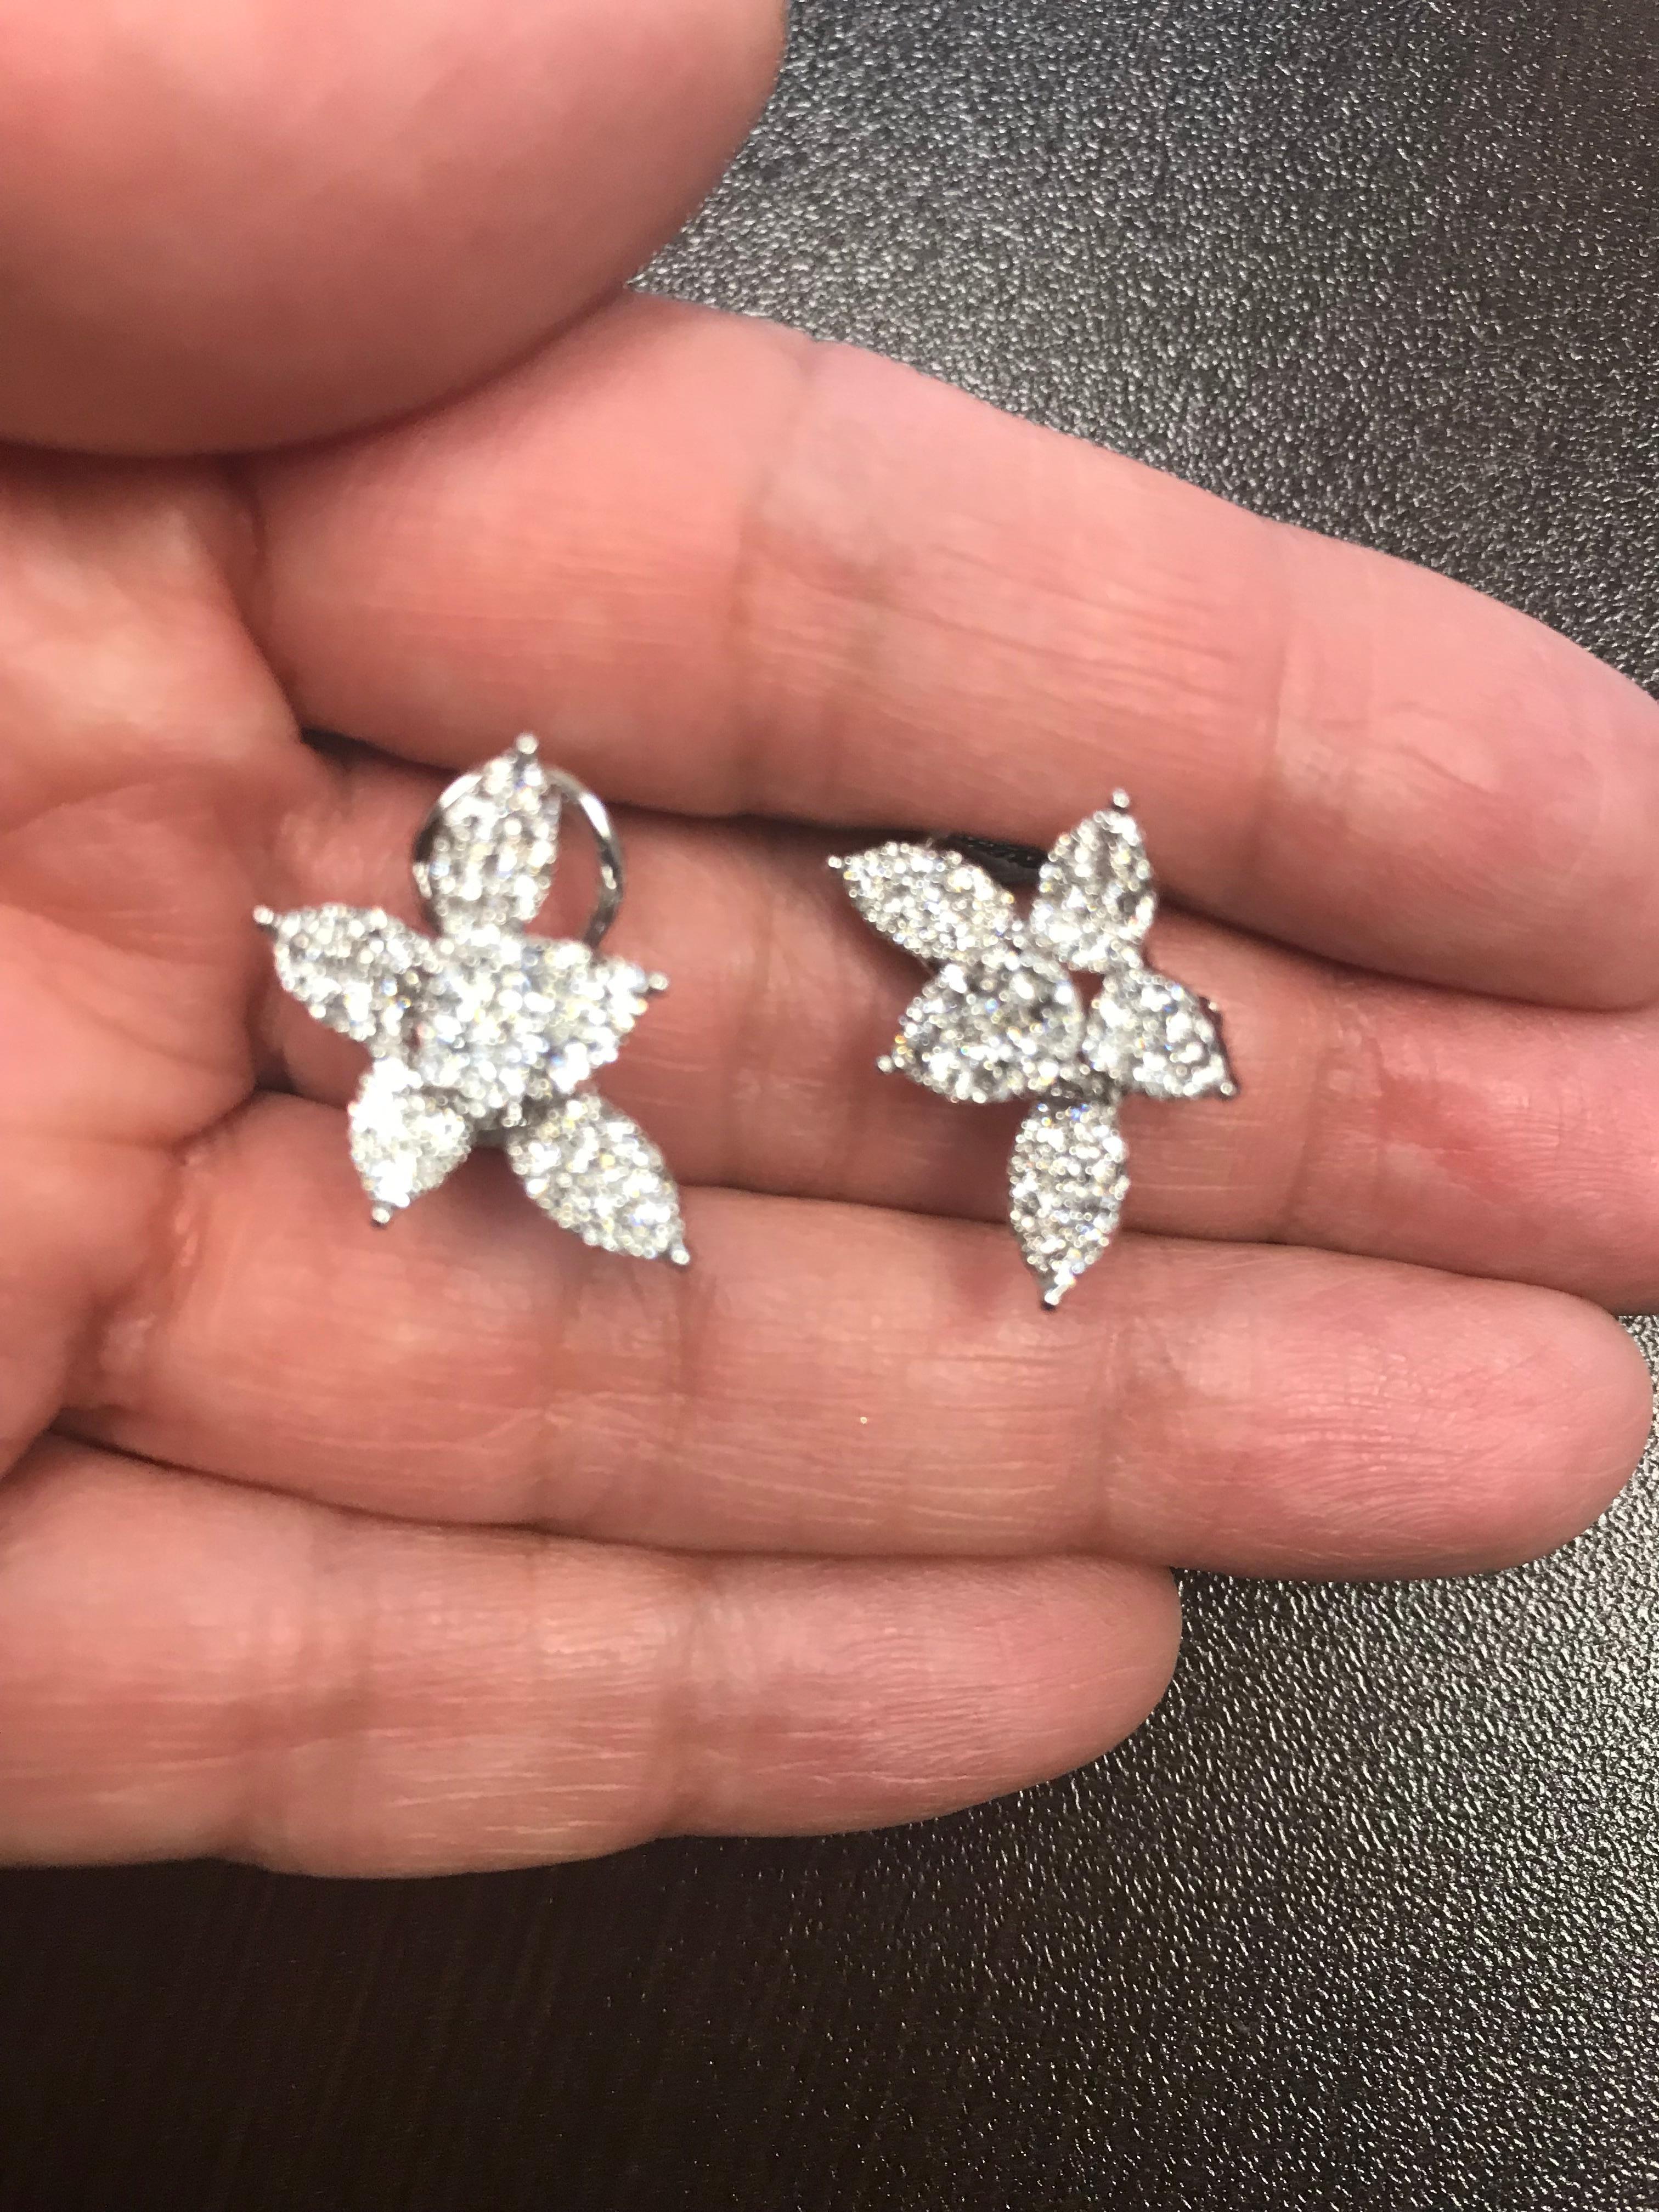 This pear shaped flower earrings are set in 18K white gold. The earrings are set with round diamonds. The total carat weight is 1.84. The color of the stones are F, the clarity is VS1-VS2. These earrings are set in a pave style, that create the